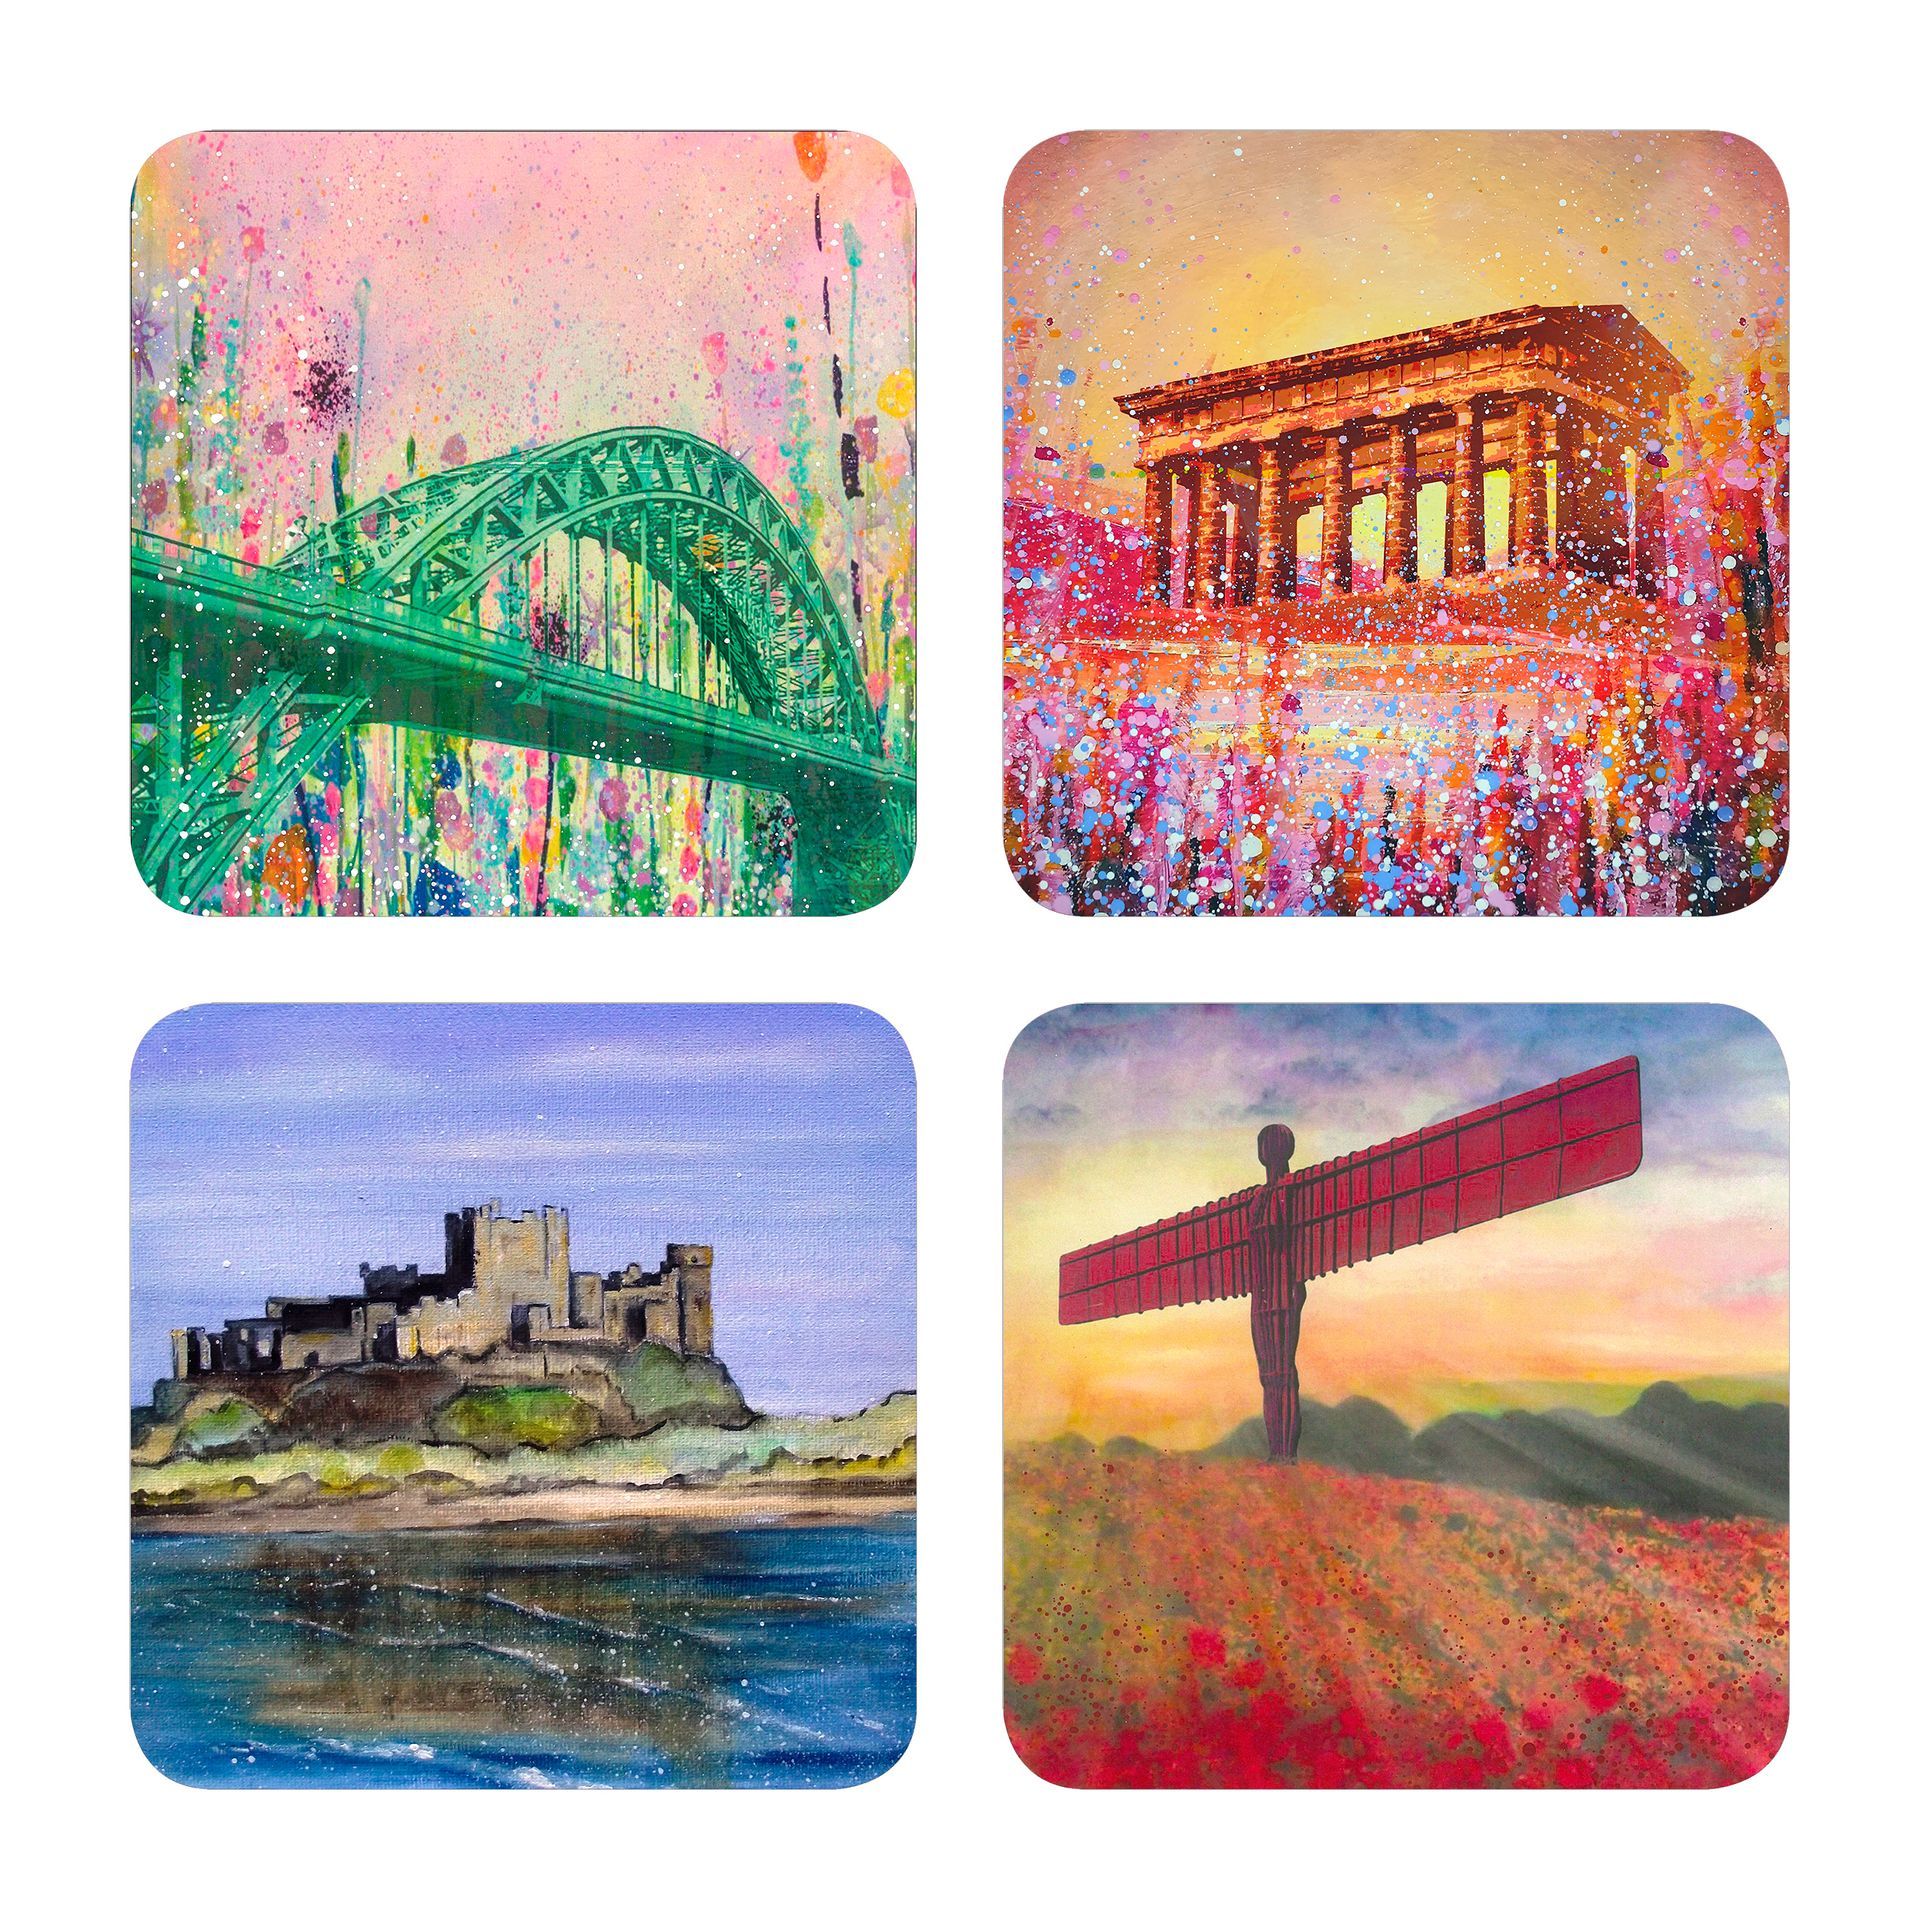 North East Souvenirs, North east, Tyne Bridge, Penshaw monument, Bamburgh Castle, Angel of the north, Coasters set of 4 in a box